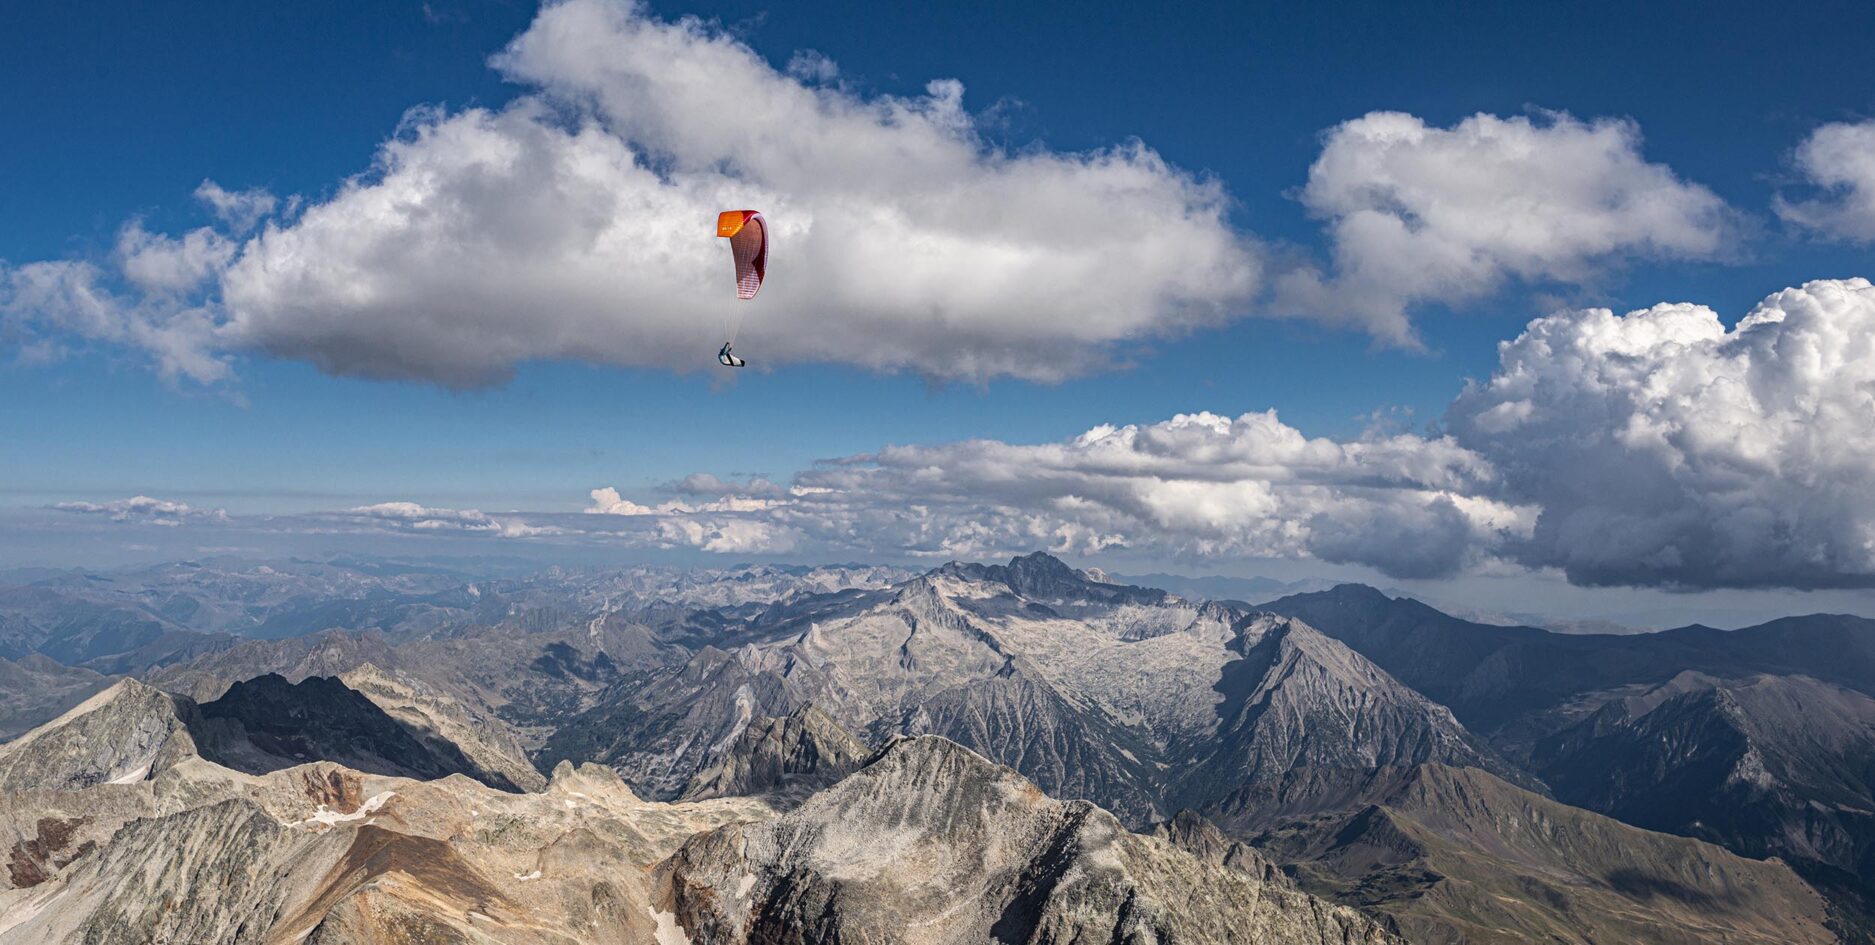 Paragliding in the centre of the Pyrenees. Photo: Jerome Maupoint